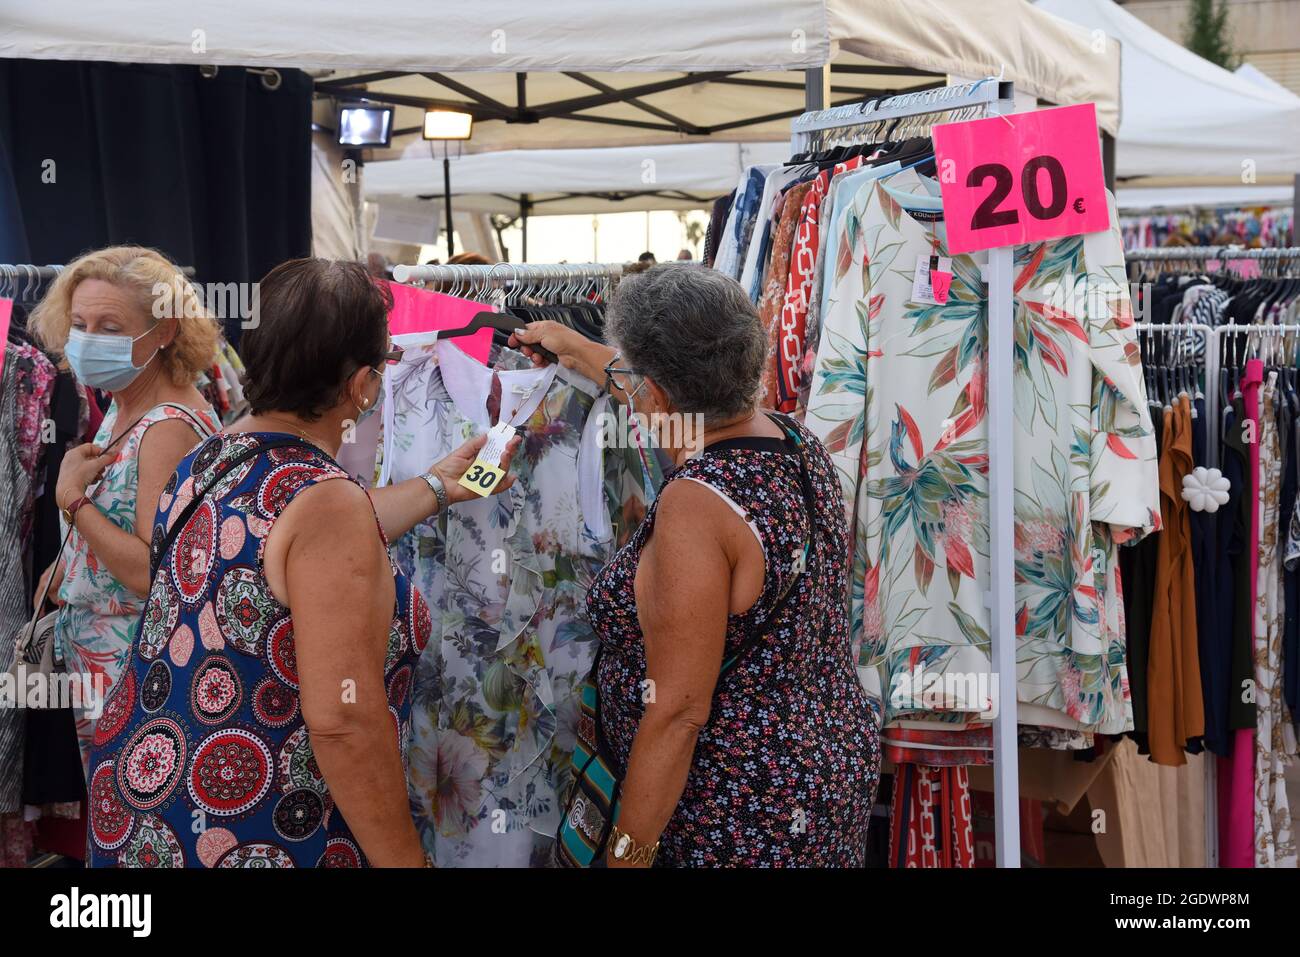 Vendrell, Tarragona, Spain. 5th Aug, 2021. Two women observe the prices of the clothes with discounts sale in the market Out Stocks.The Vendrell Center for Initiatives and Tourism (CIT) organizes the ''Out Stocks Market'' is a help at the end of the summer sales, several clothing and accessories stores set up a stand on the street so that stores have the opportunity to sell the Leftover products from sales to start the new fashion season.The Vendrell Center for Initiatives and Tourism (CIT) is an associative entity that helps and works to promote shops, bars and restaurants and commercial co Stock Photo